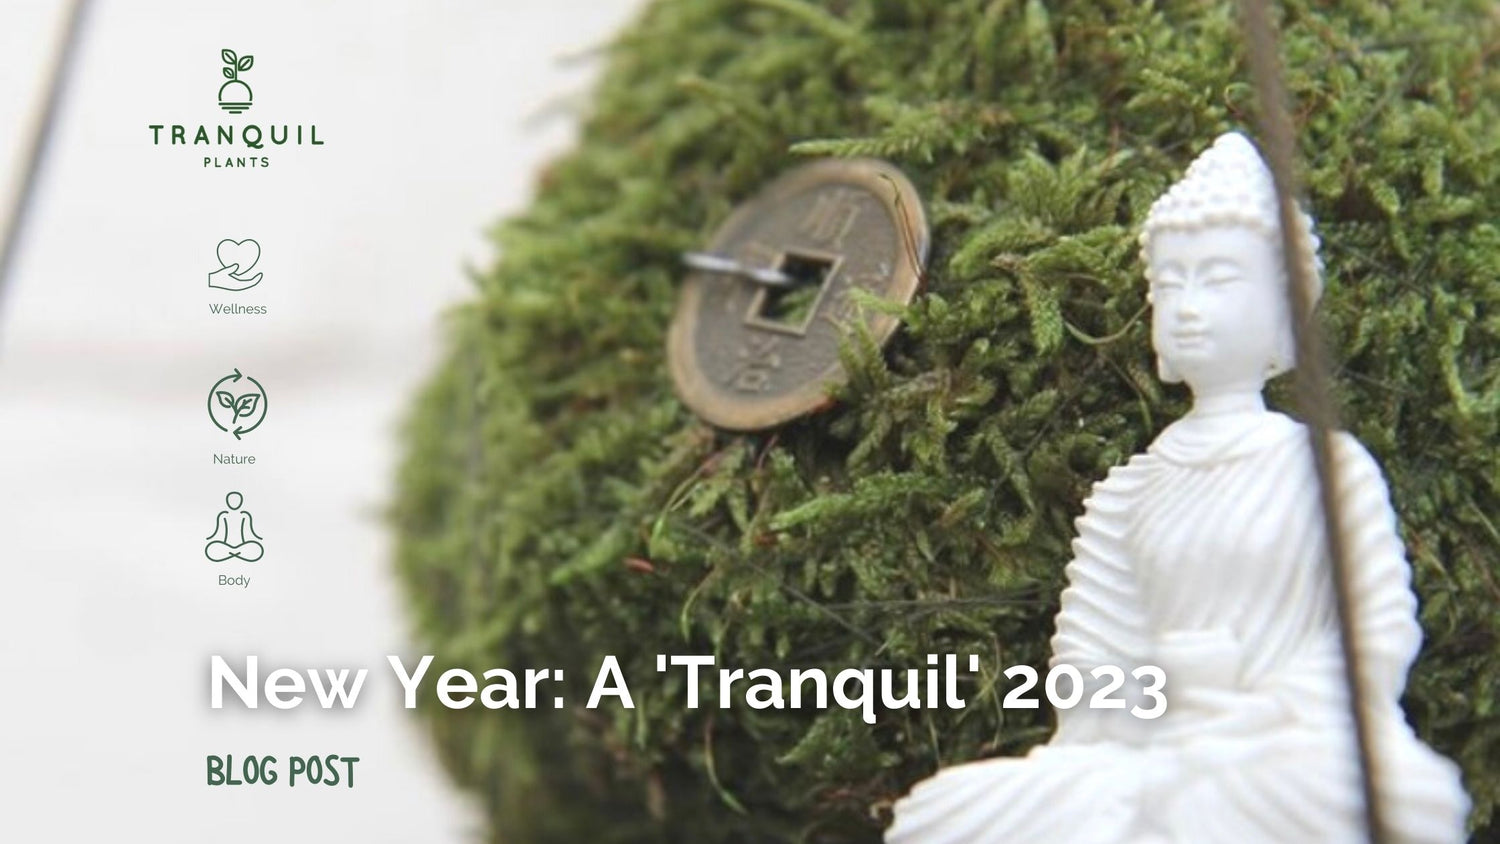 A Tranquil 2023: How Kokedama can help create Peace in the New Year